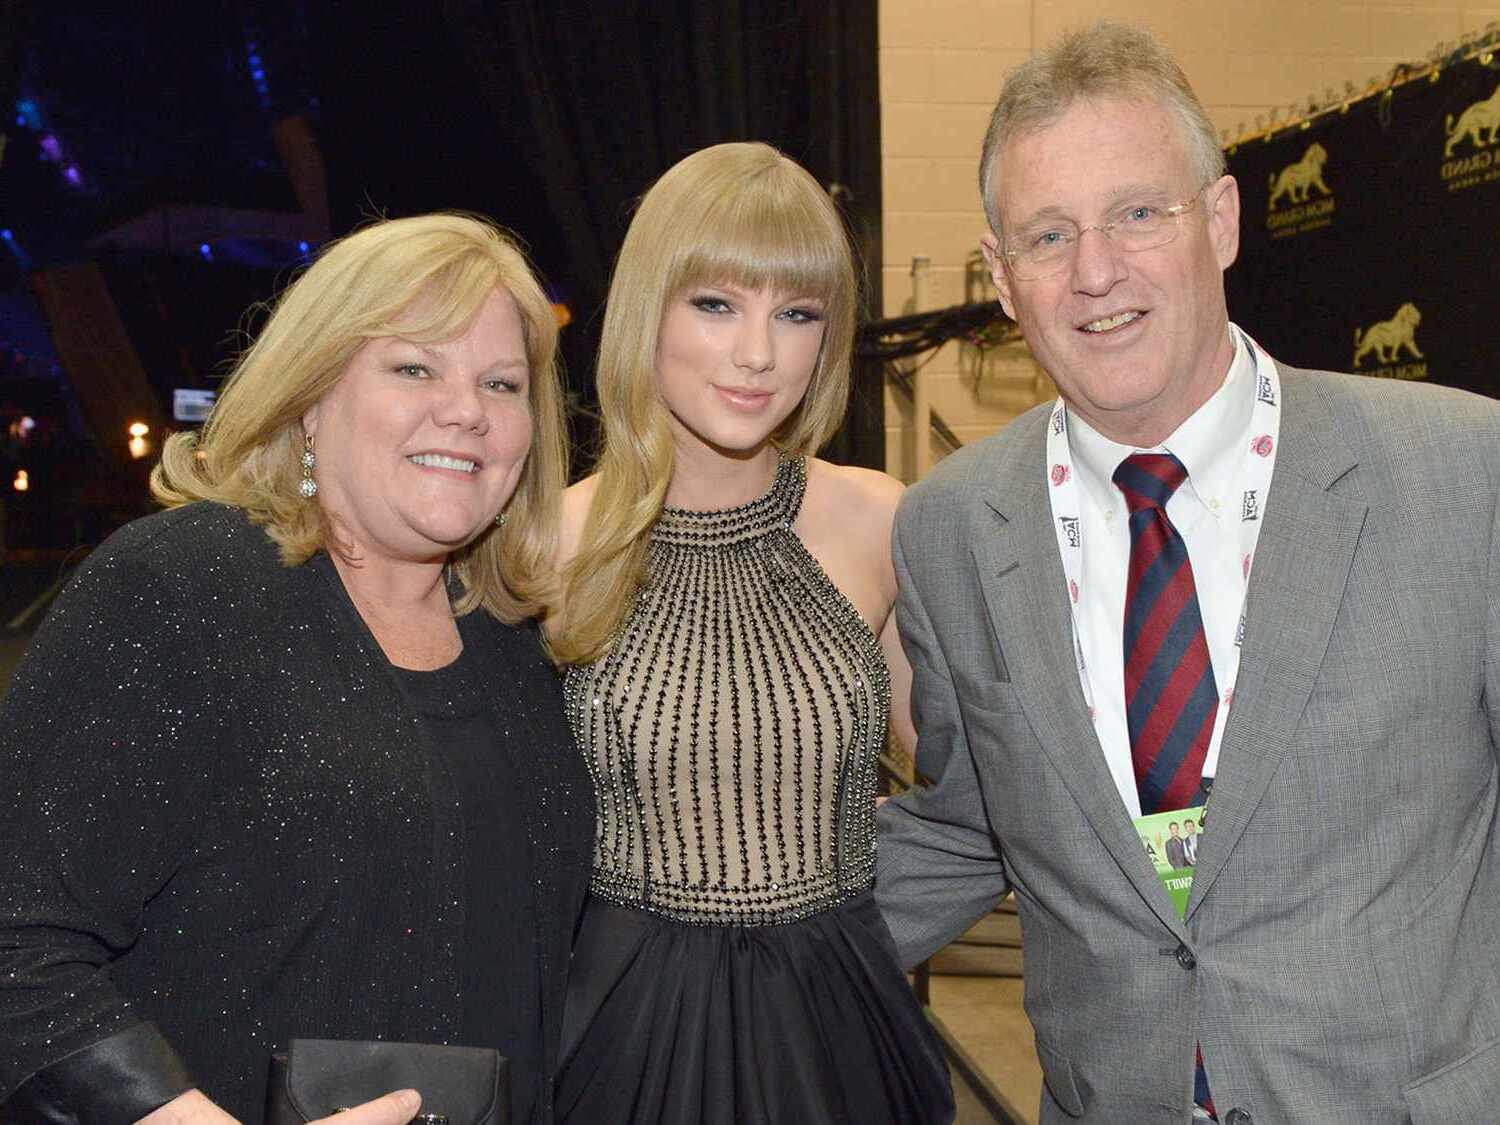 New Incident Involving Taylor Swift’s Dad And Paparazzi Unfolds In Australia